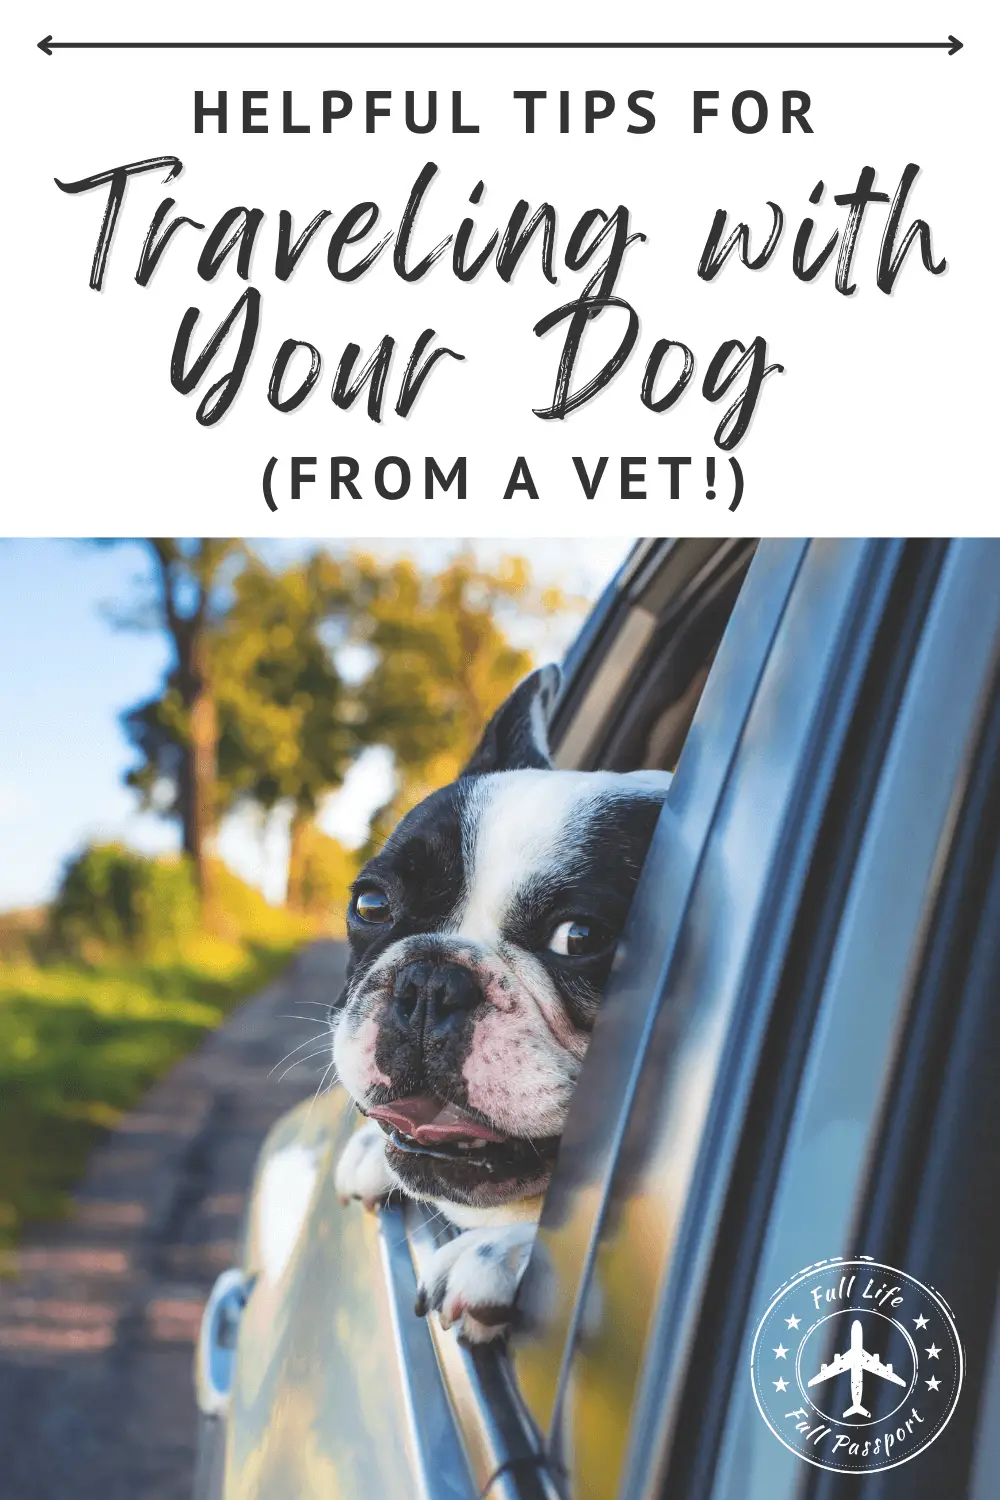 Helpful Tips for Traveling with Your Dog [From a Vet!]